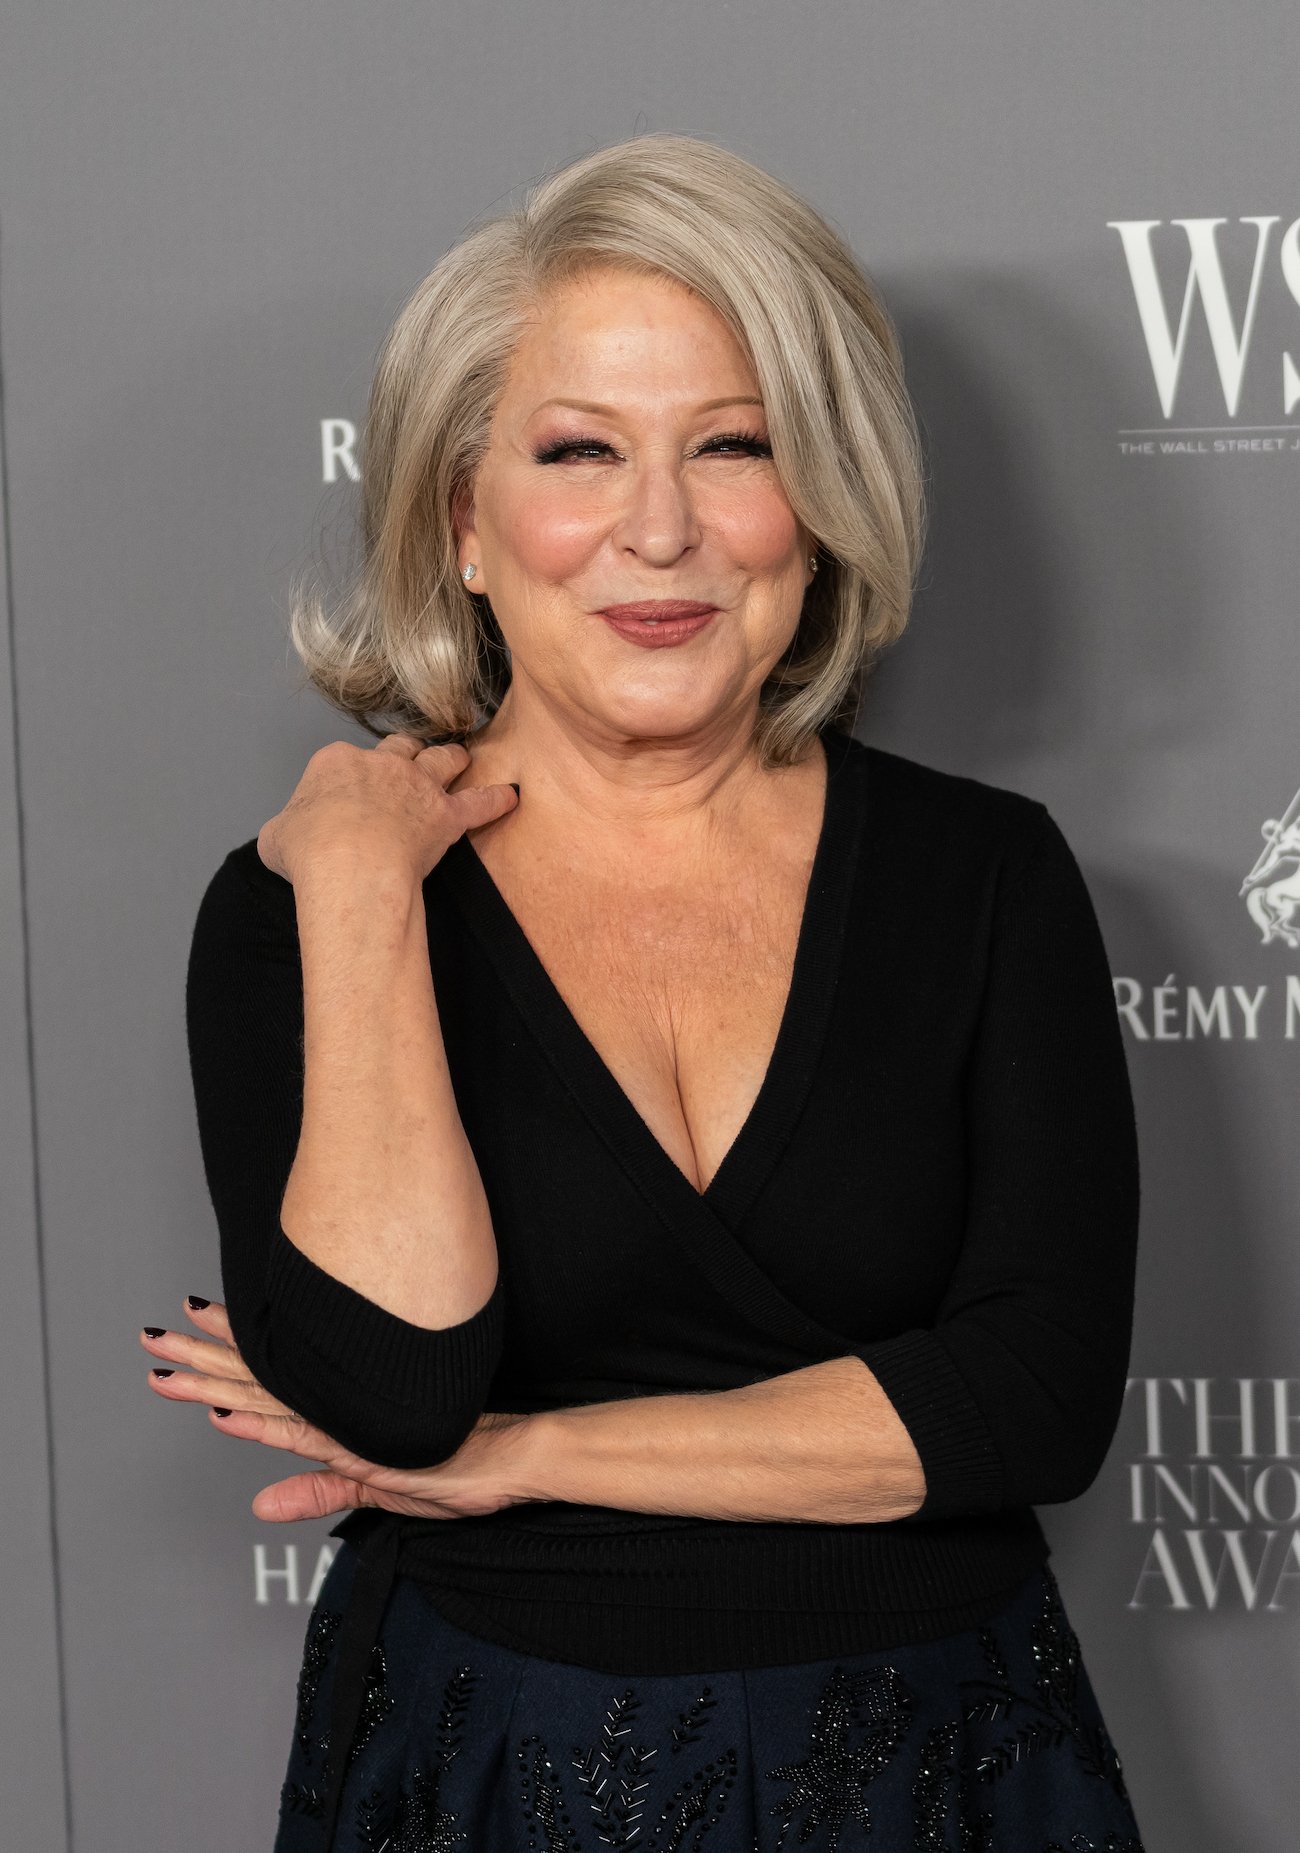 Bette Midler poses for cameras at the WSJ Mag 2019 Innovator Awards at the Museum of Modern Art